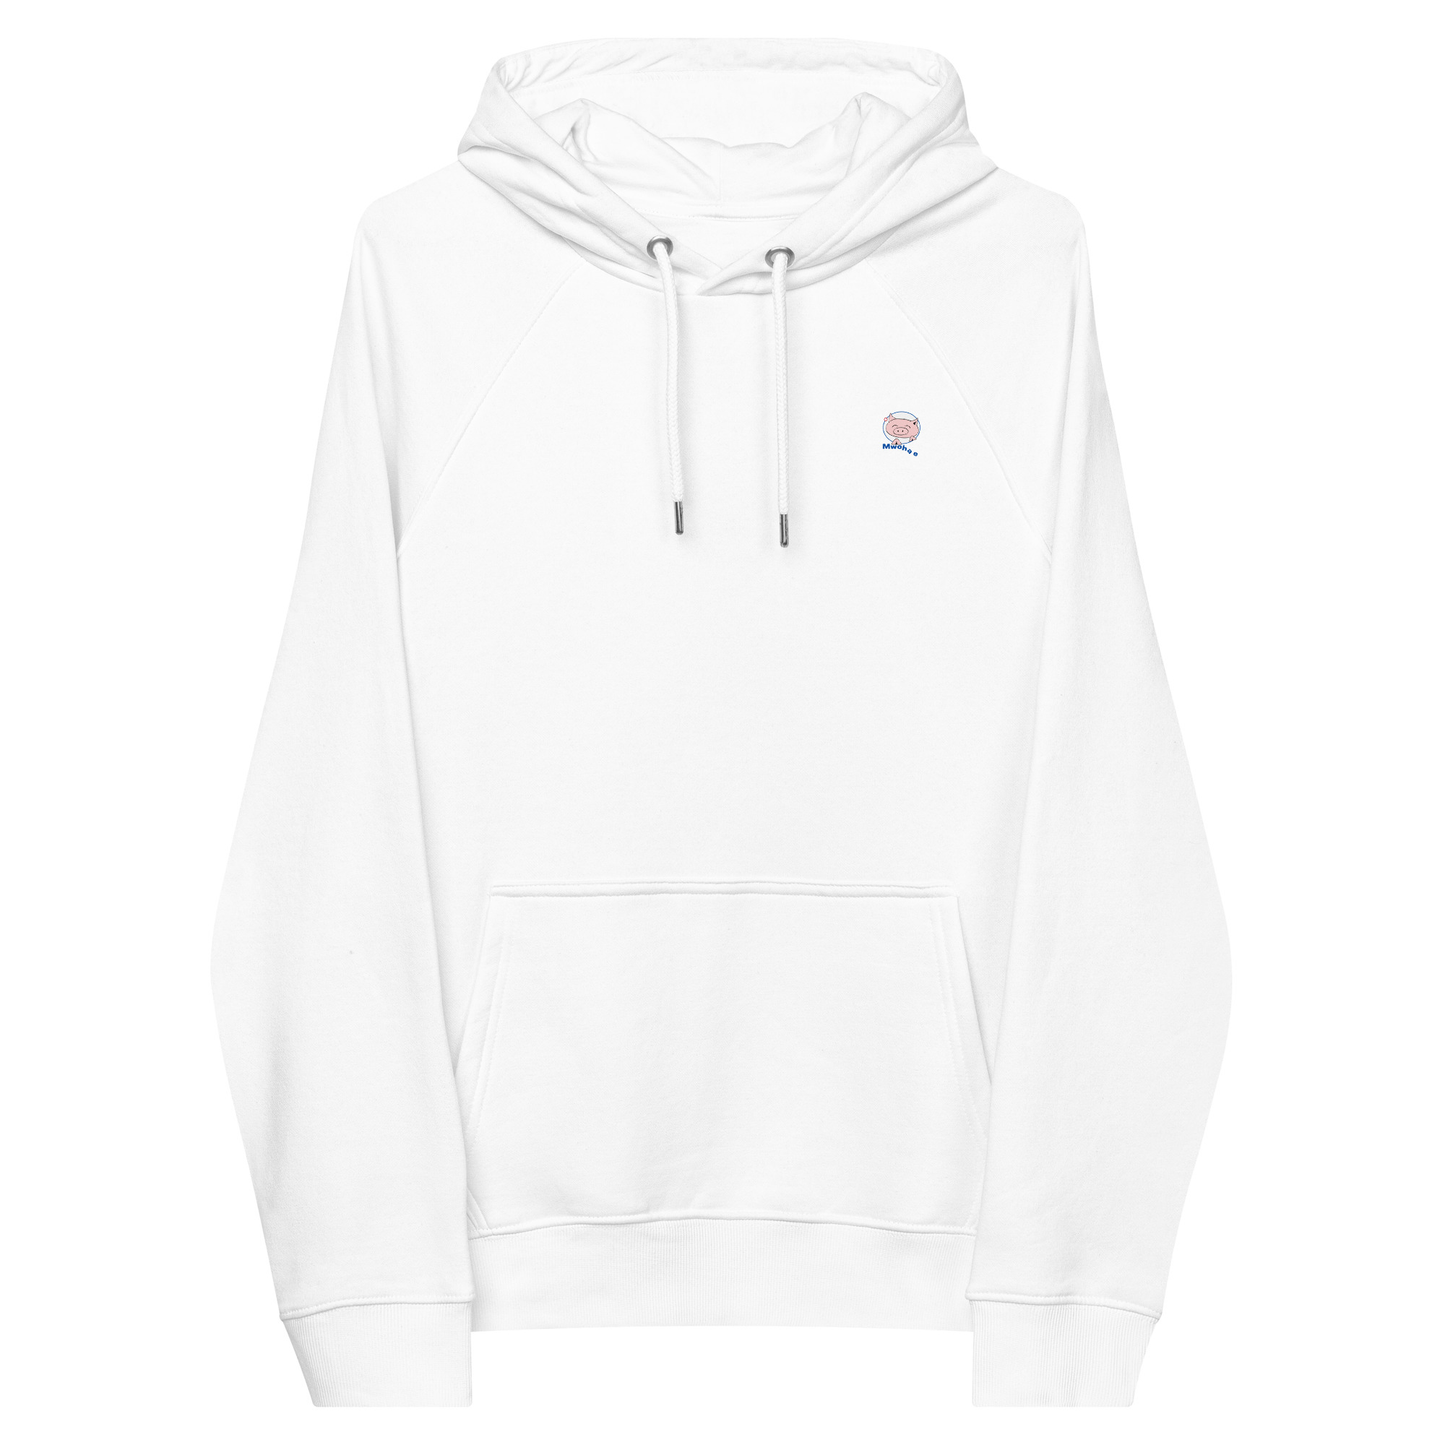 White extra soft hoodie with small Mwohae logo on the left chest